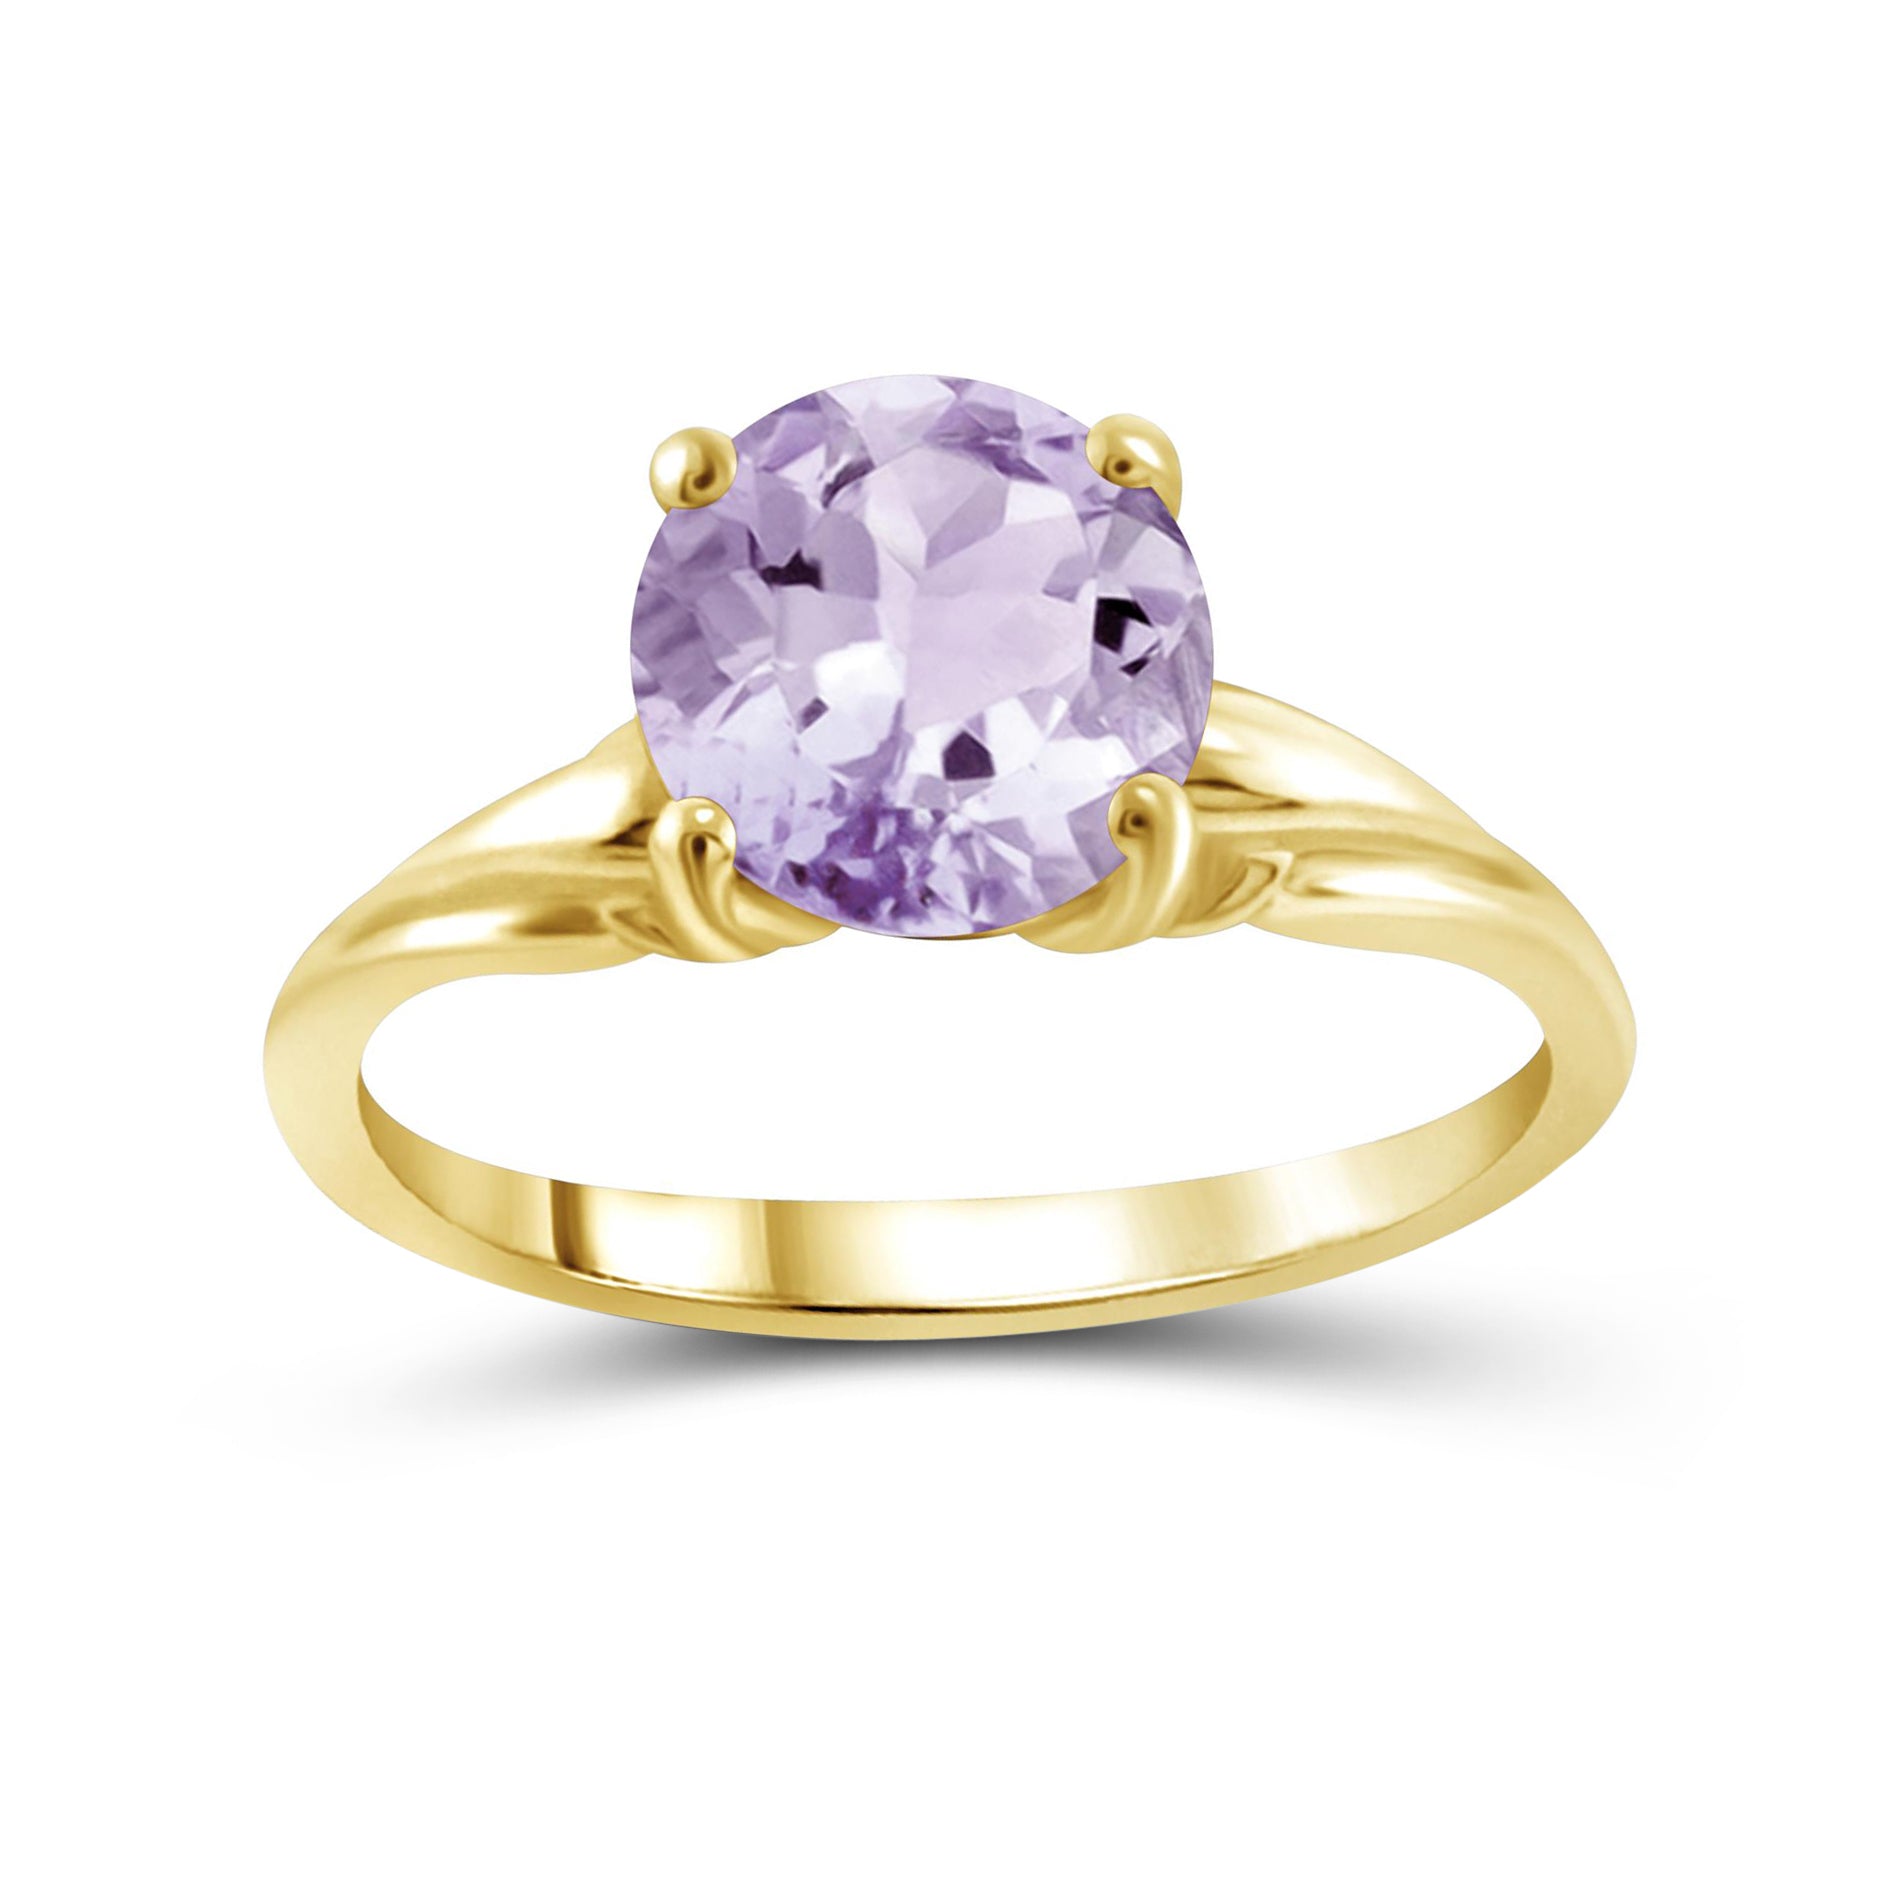 1.85 CTW Pink Amethyst Gemstone Ring in 14K Gold-Plated